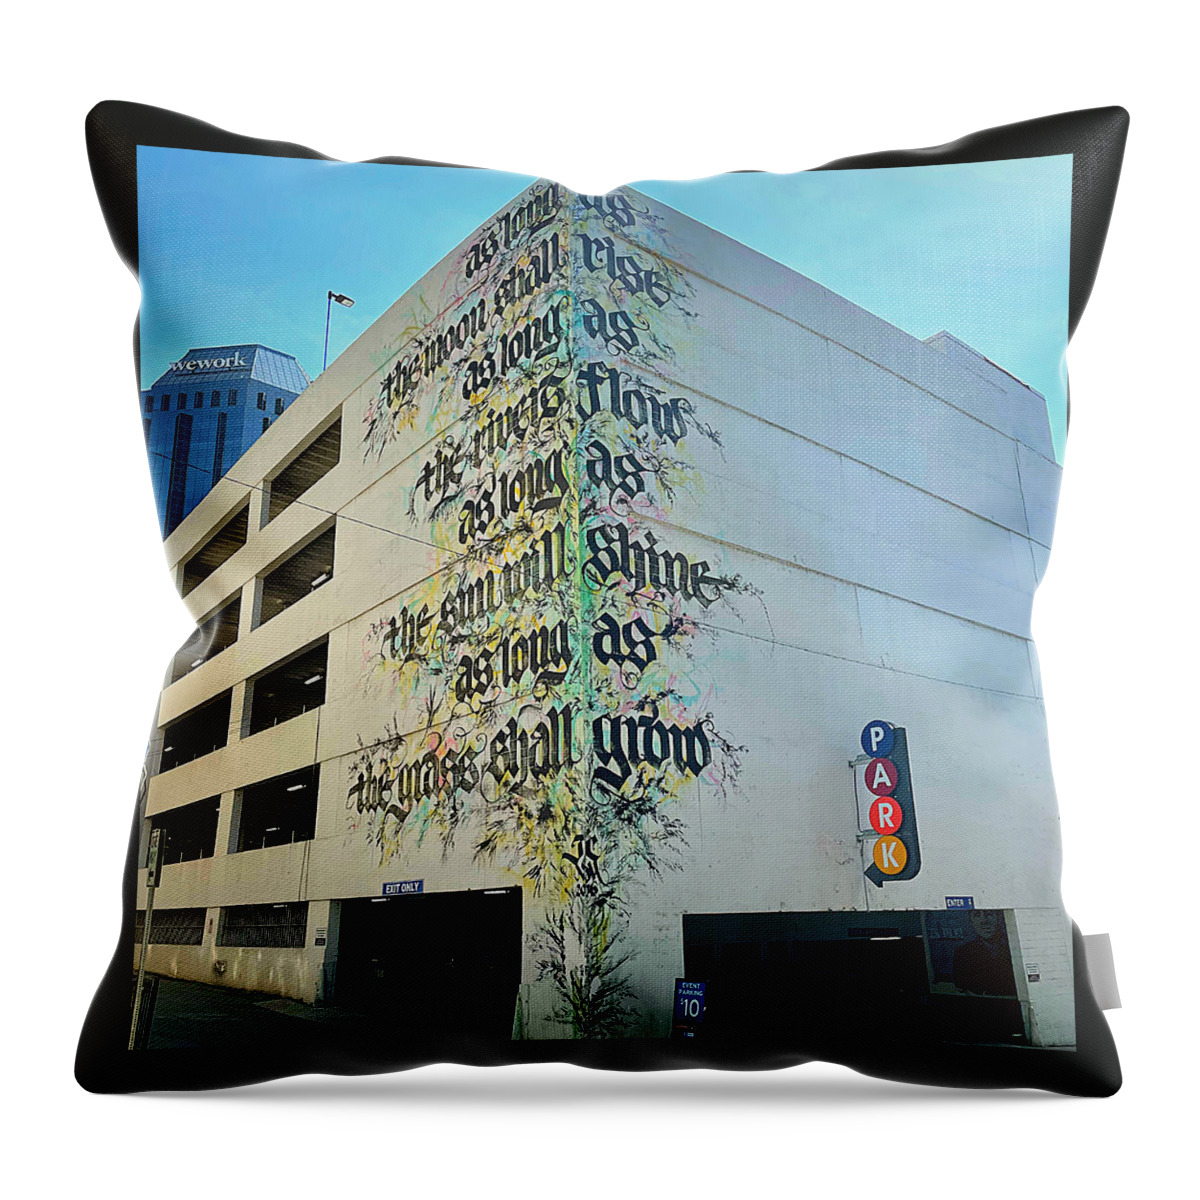 Quote Throw Pillow featuring the photograph So Quoth The Corner by Lee Darnell